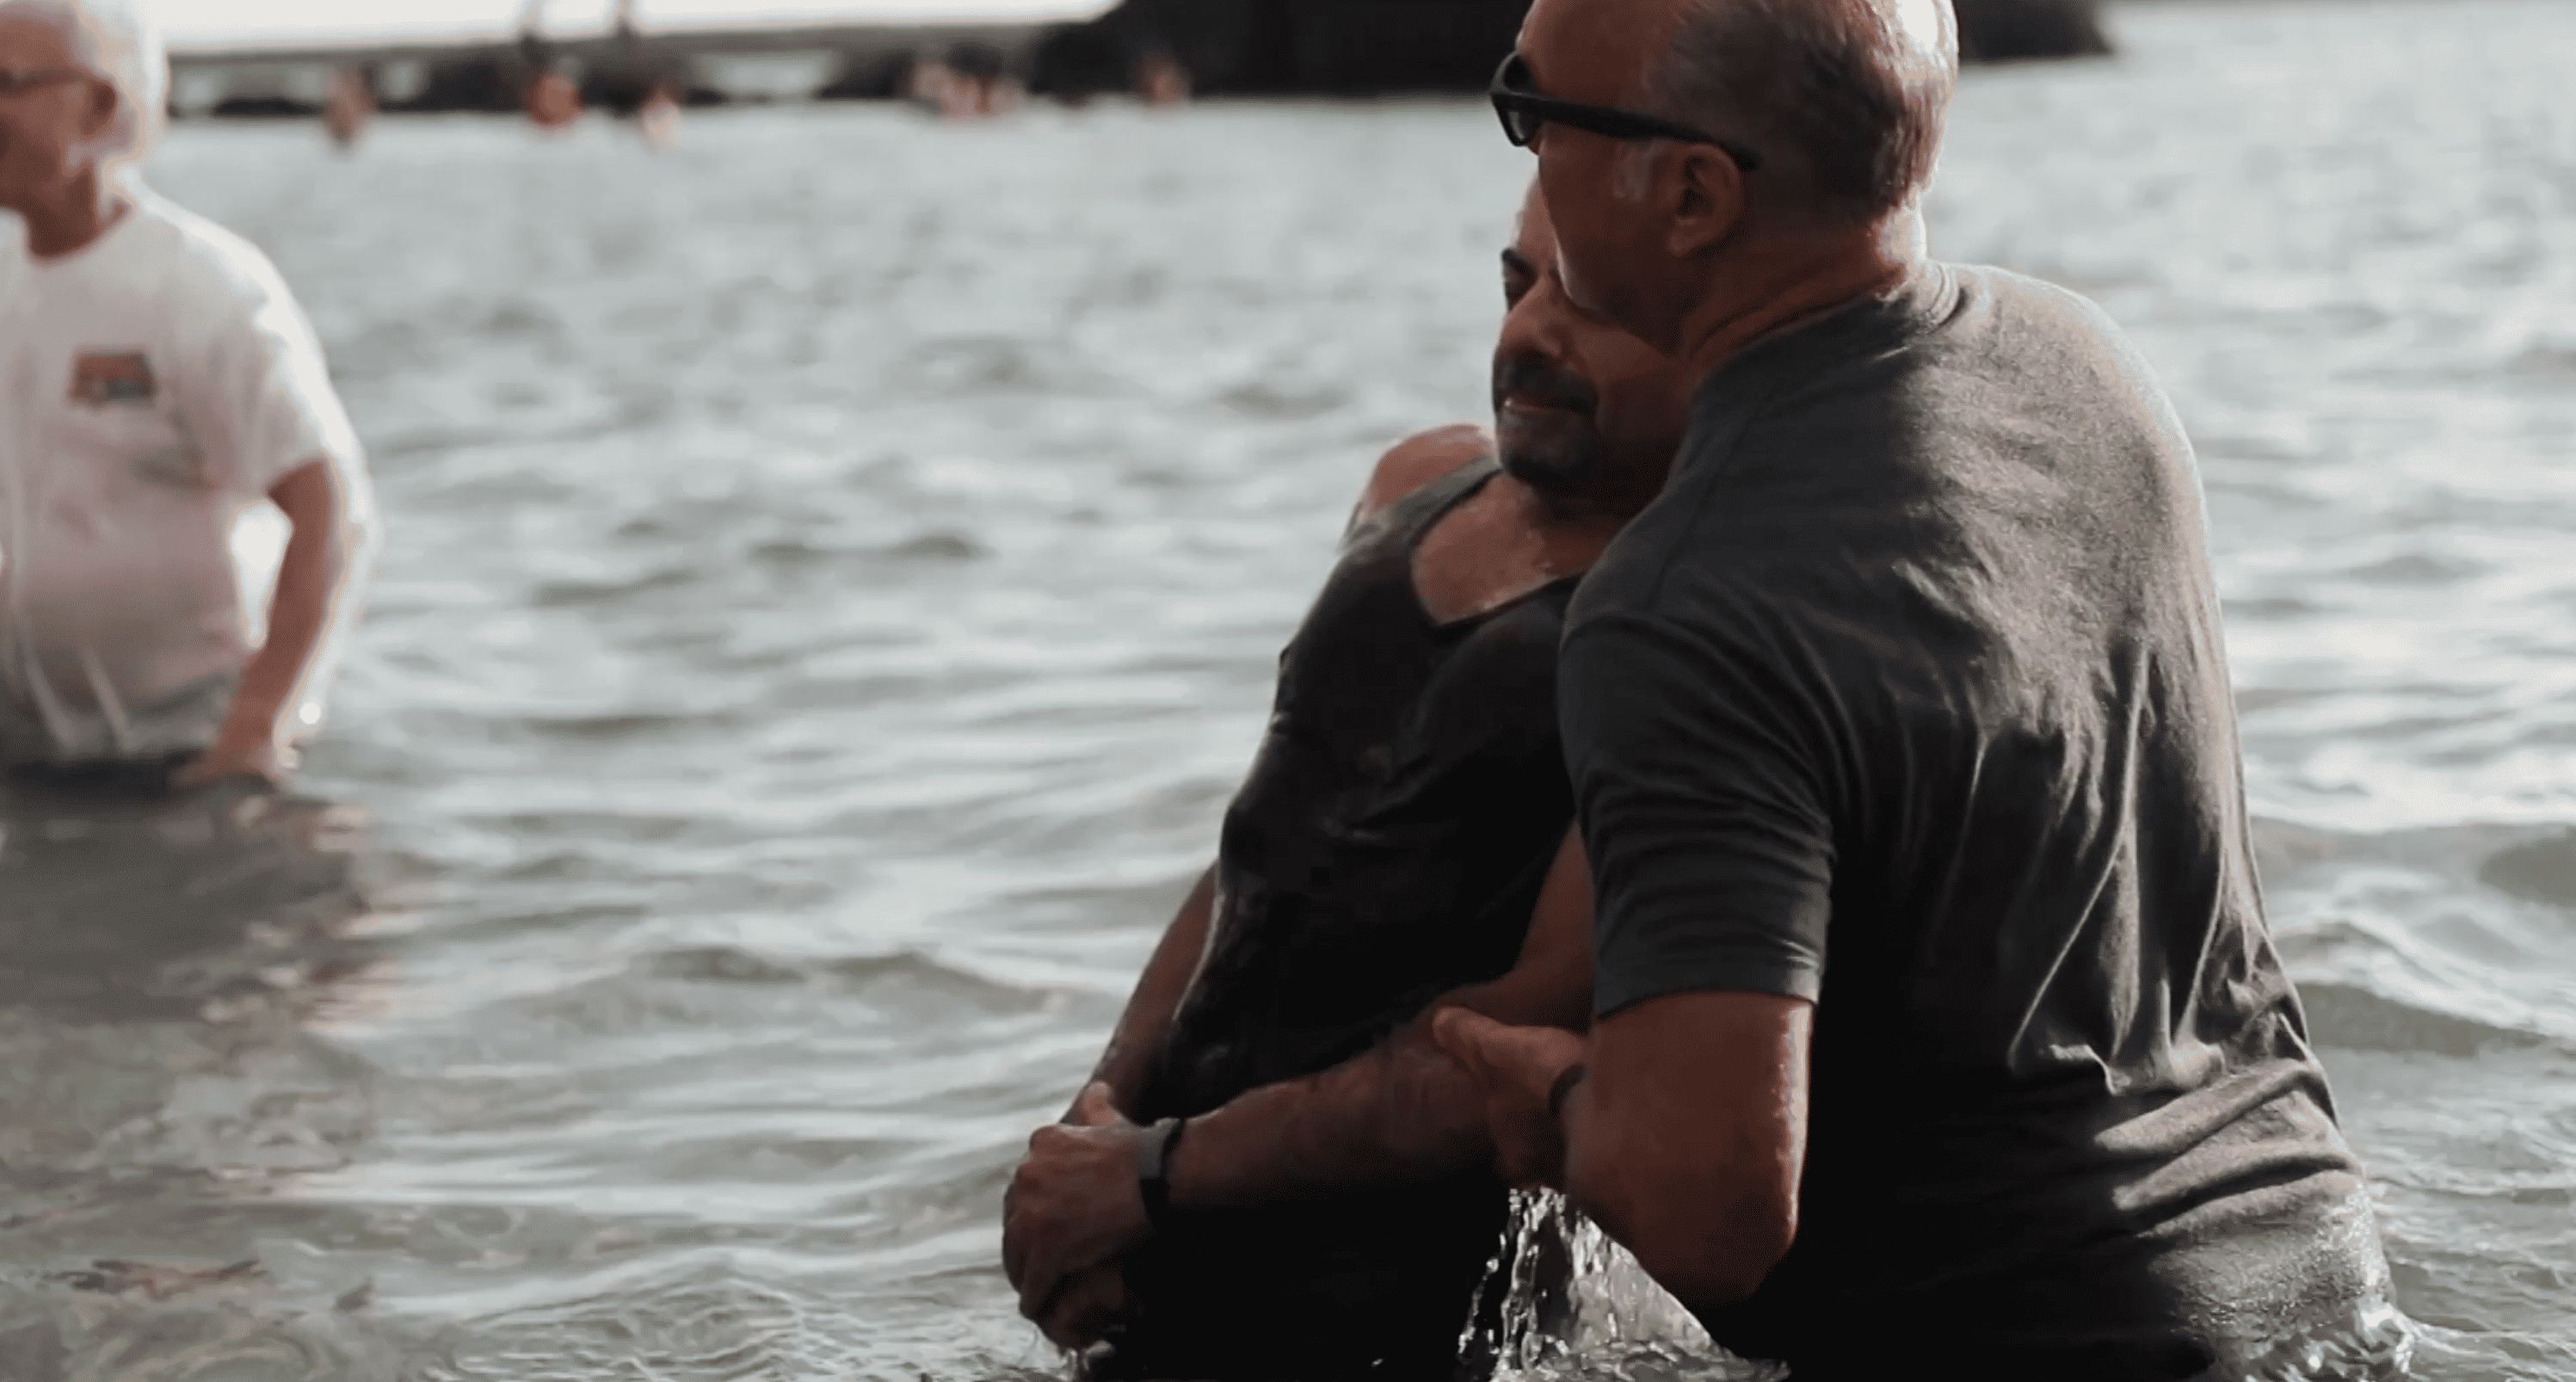 Greg Laurie baptizes man at Pirate's Cove beach in CA